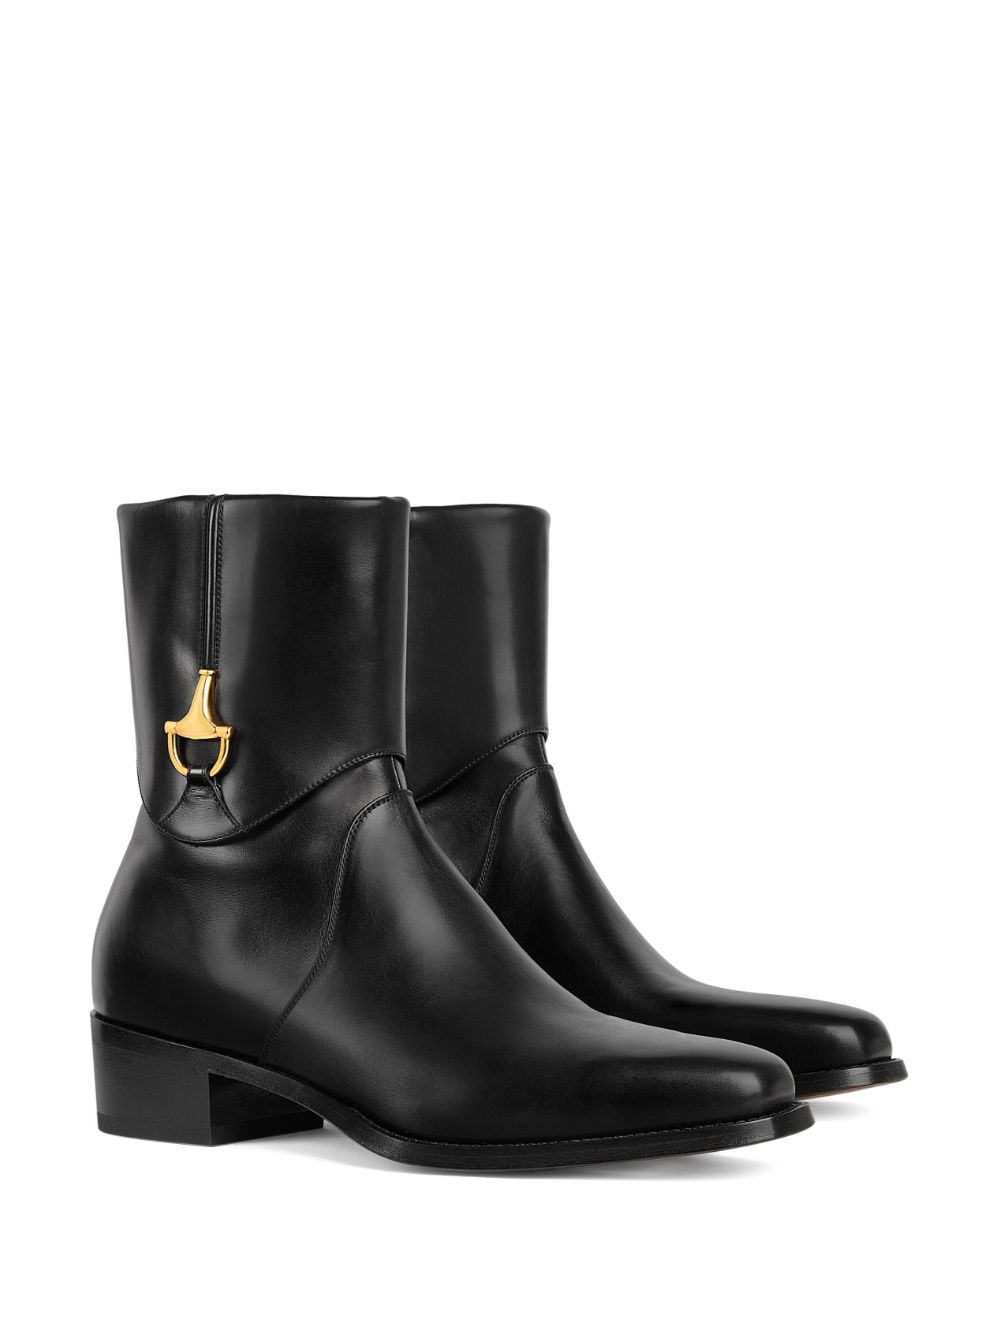 Gucci Horsebit-detail 45mm Leather Ankle Boot - Farfetch